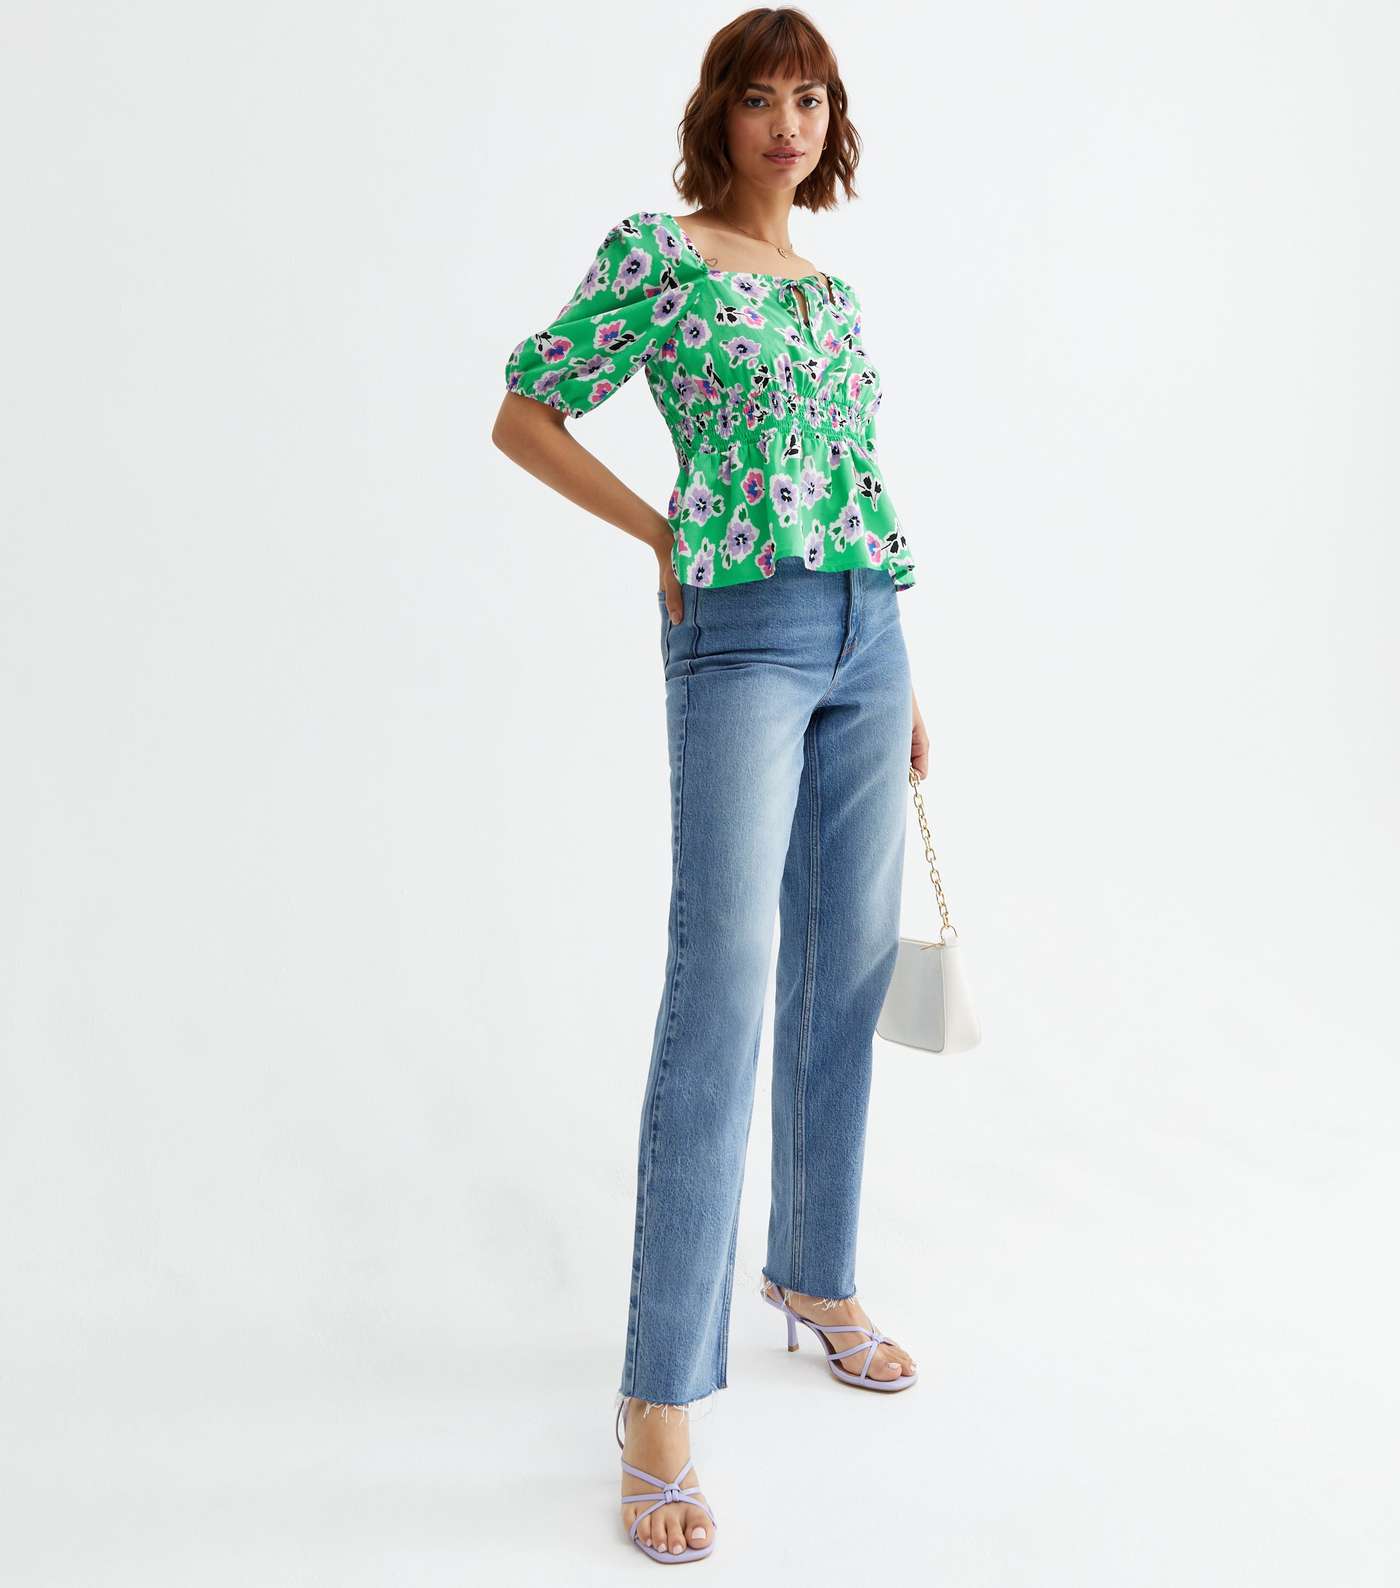 Green Floral Square Neck Peplum Blouse Image 2